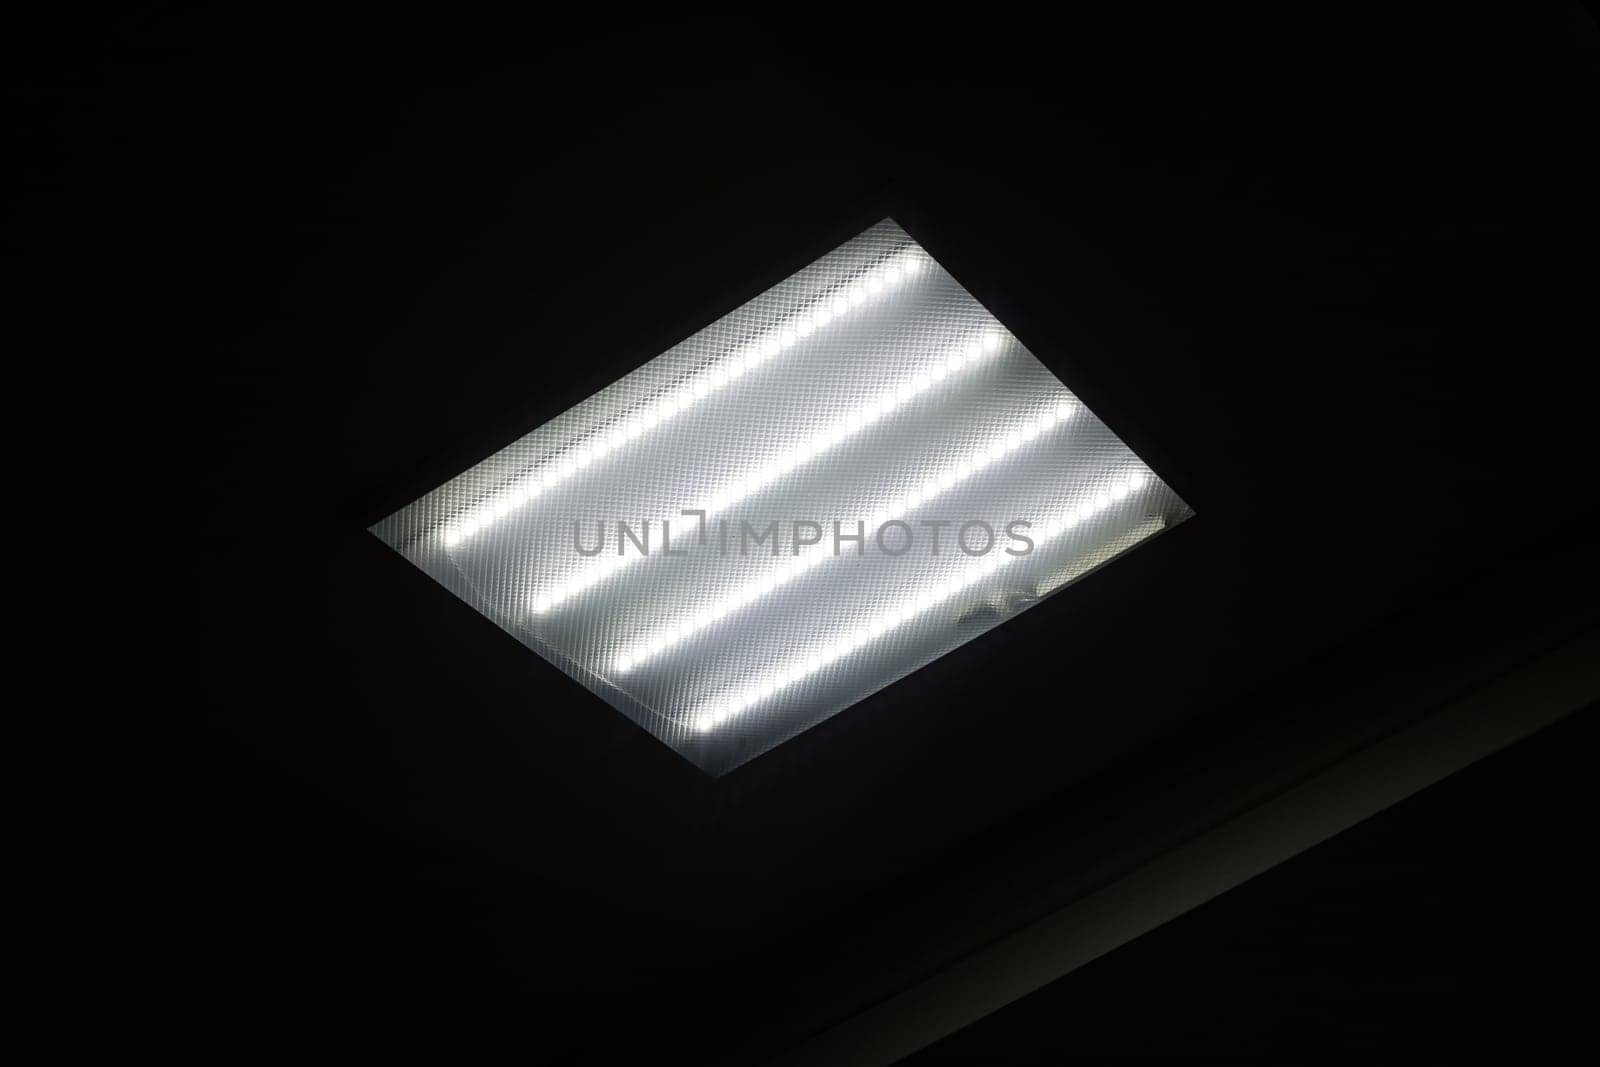 Square fluorescent lamp on the ceiling in the dark close up